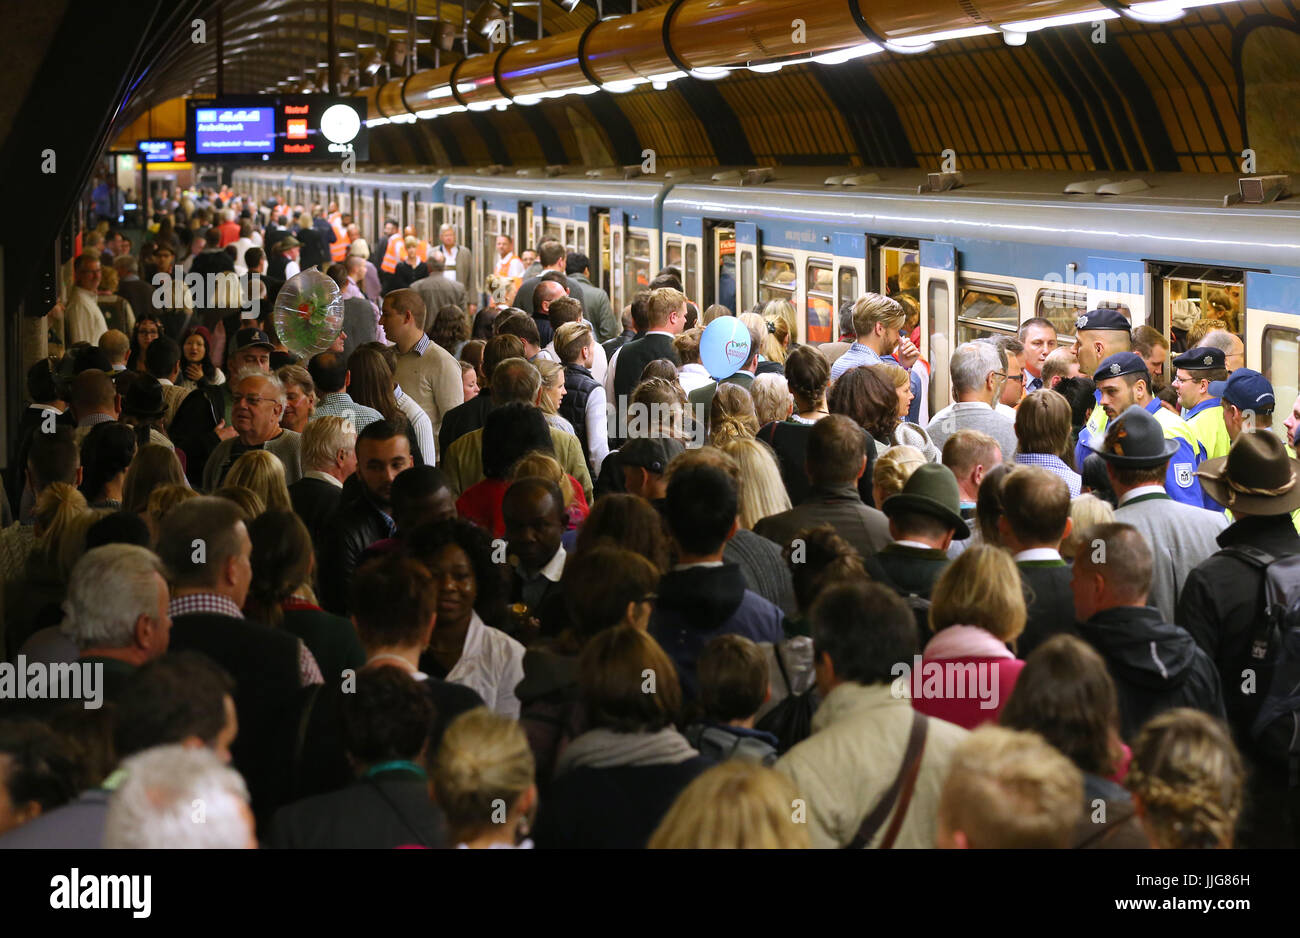 Oktoberfest visitors attempt to board a subway train on a crowded platform of Theresienwiese subway station upon their departure in Munich, Germany, 20 September 2015. The world's largest beer festival which will run until 04 October 2015 is expected to attract some six million visitors from all over the world this year. Photo: KARL-JOSEF HILDENBRAND/dpa | usage worldwide Stock Photo